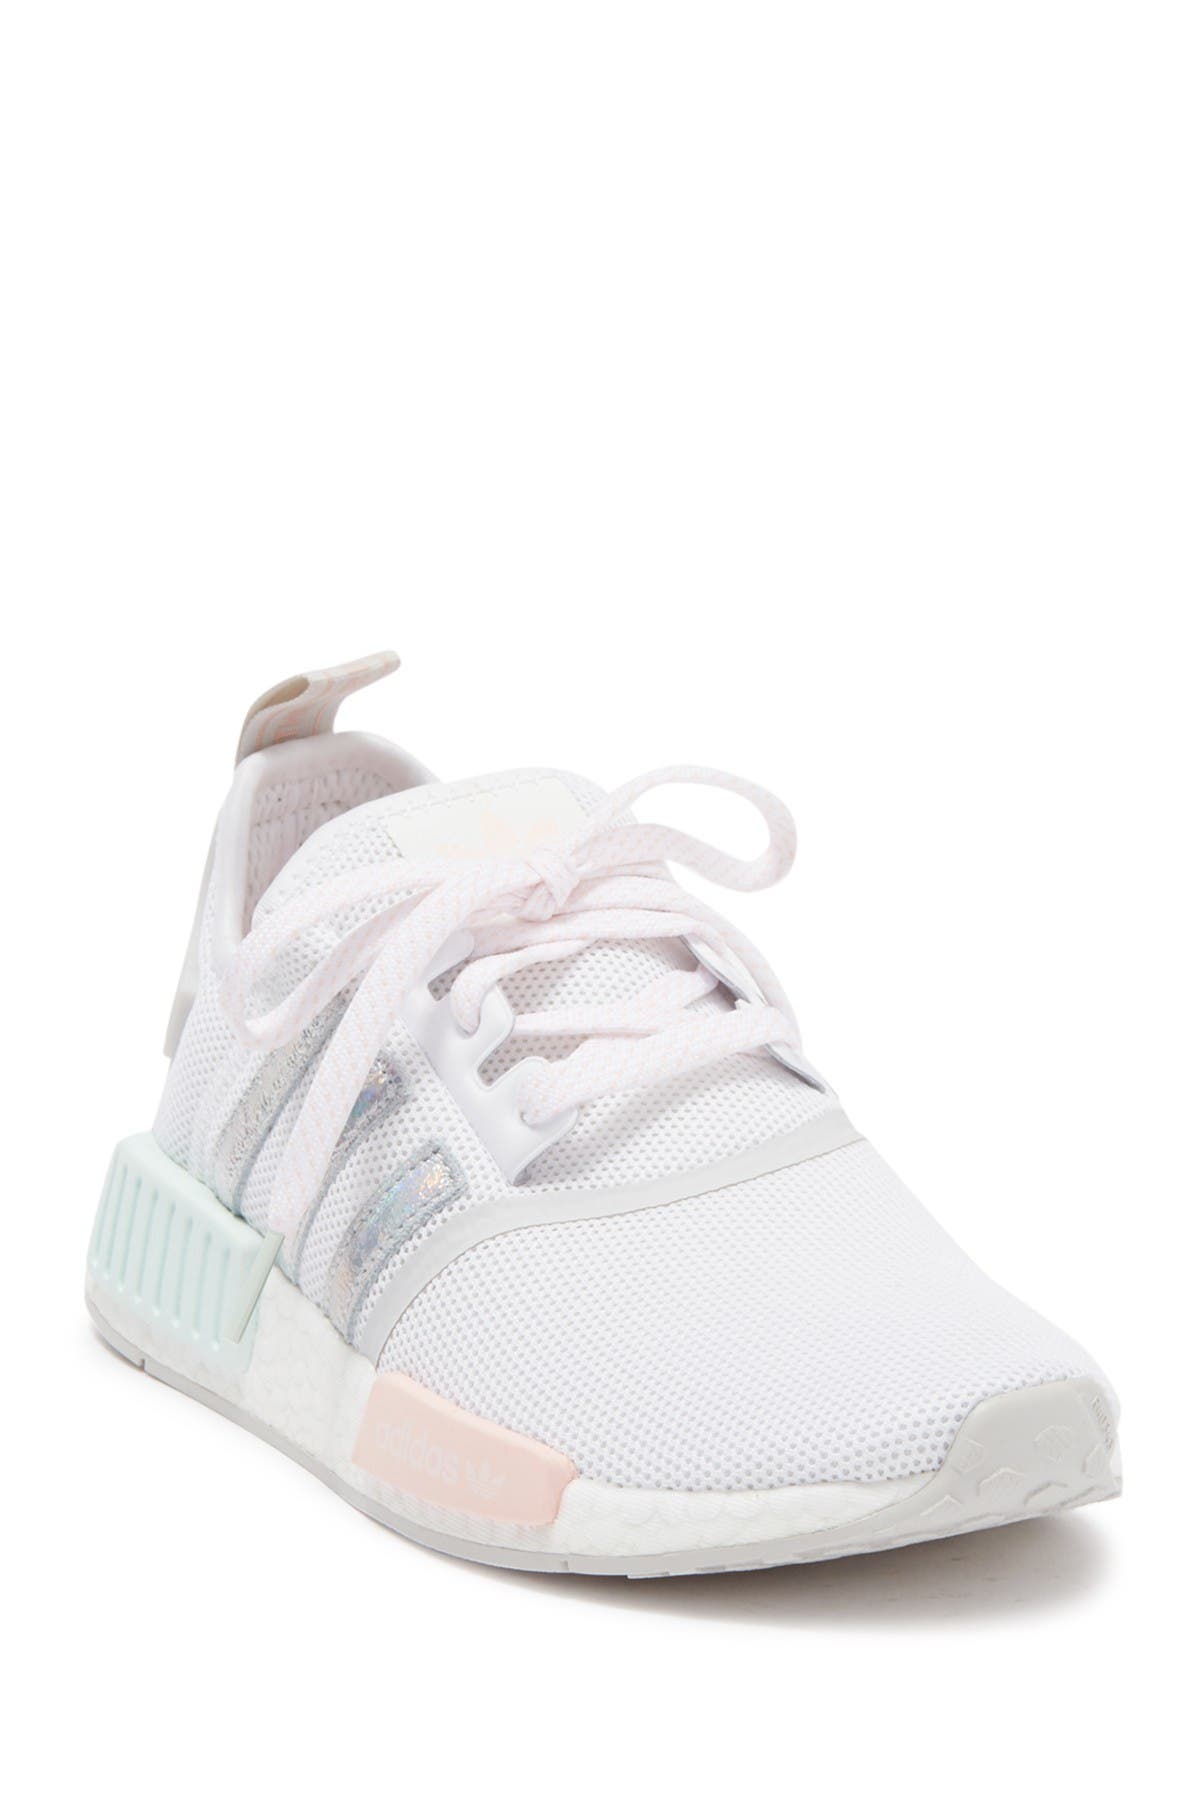 adidas Women's Shoes | Nordstrom Rack